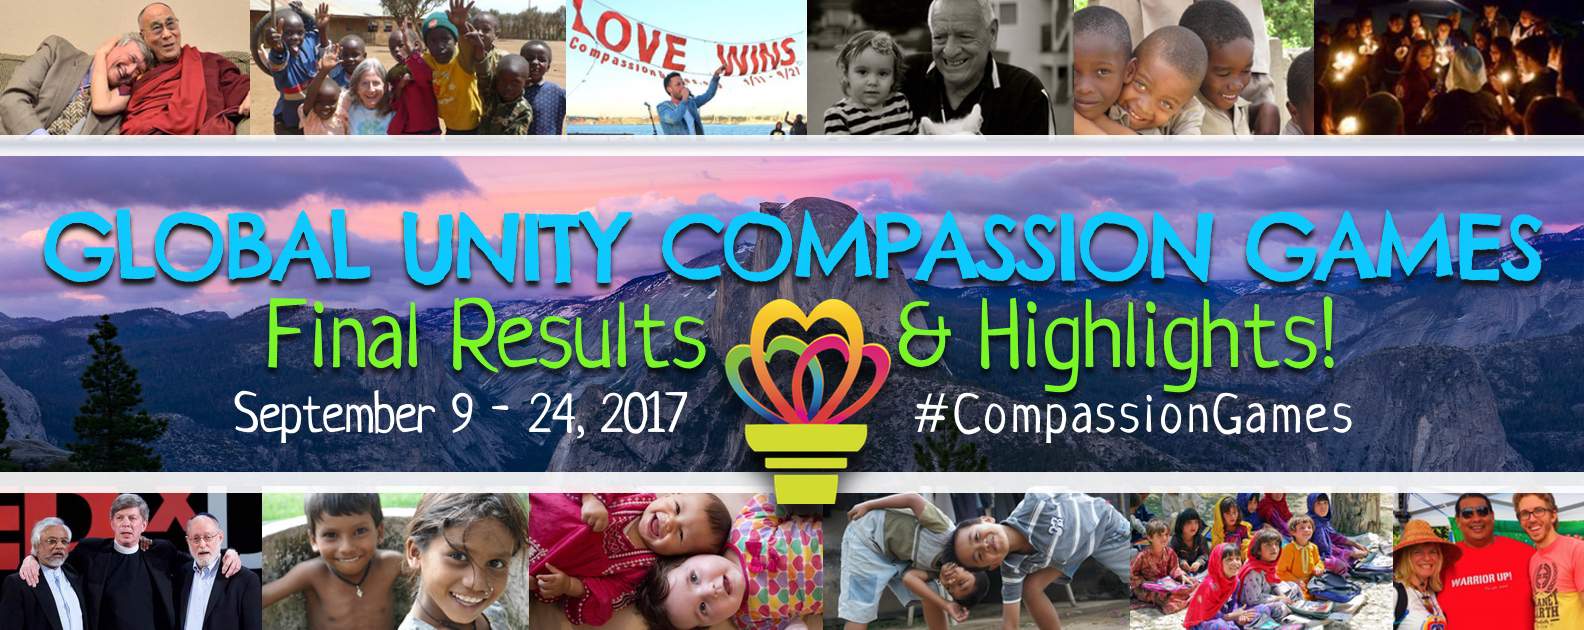 2017 Global Unity Compassion Games Results and Highlights